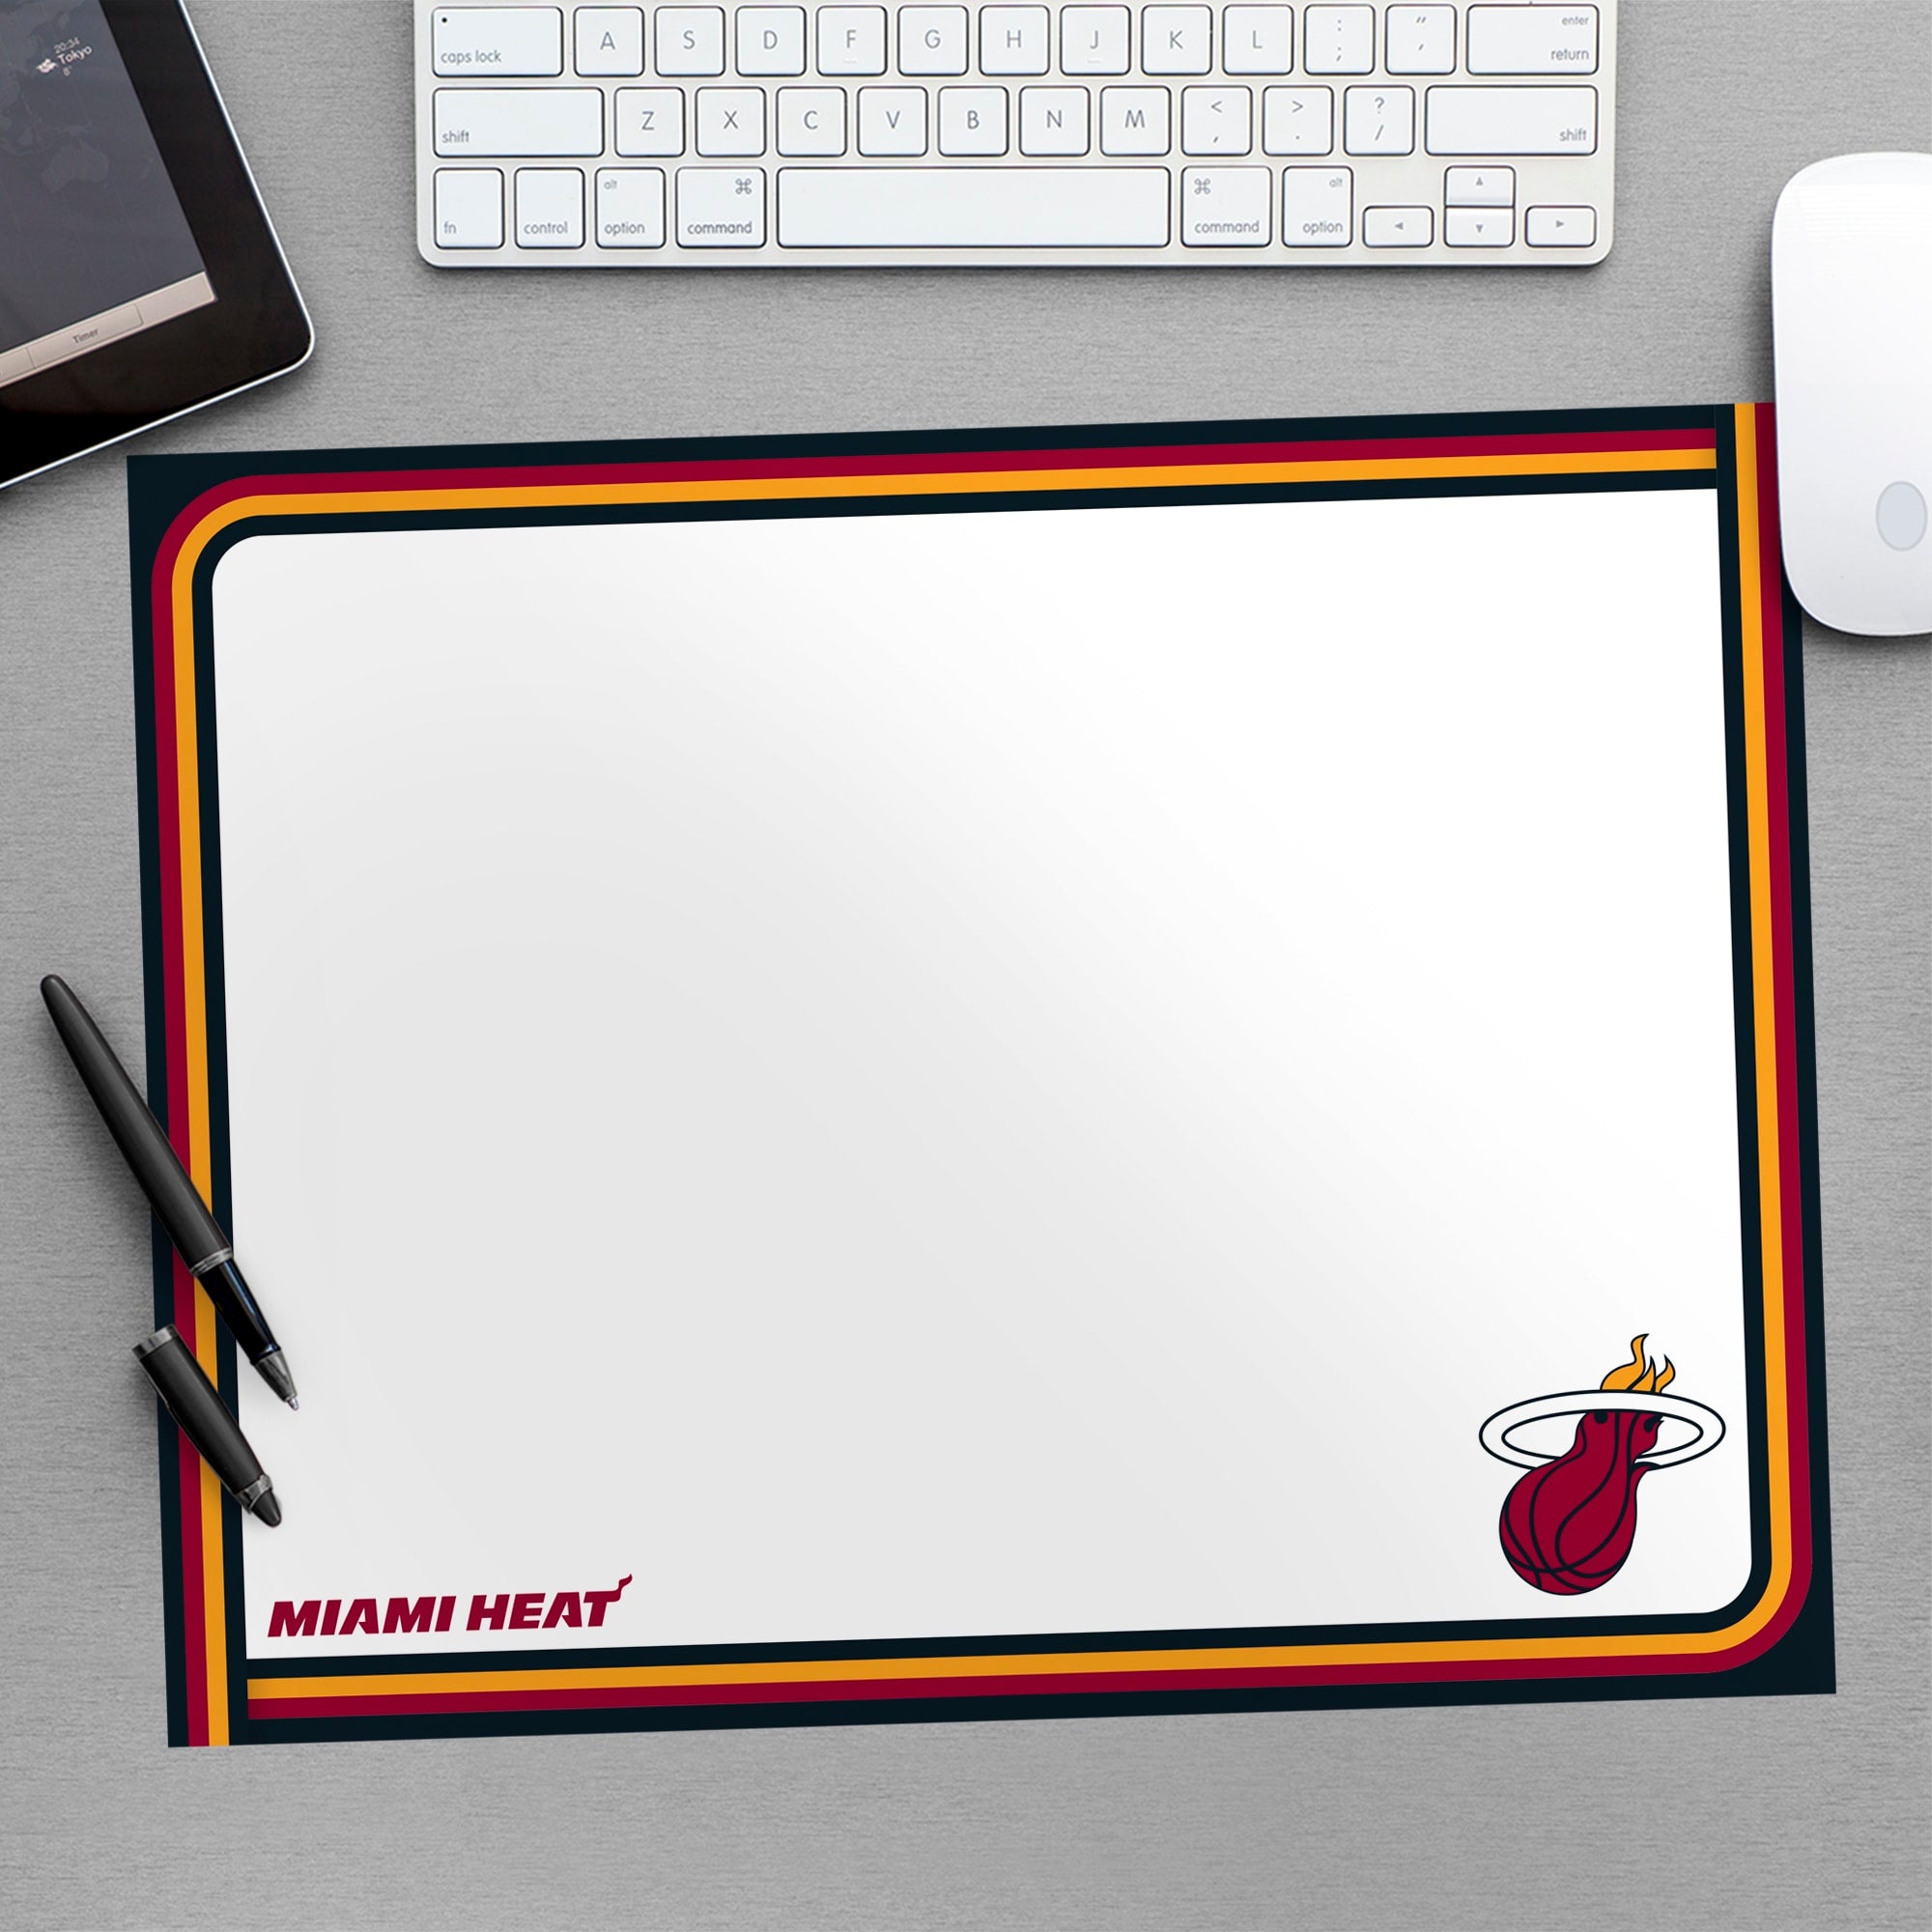 Miami Heat for Miami Heat: Dry Erase Whiteboard - Officially Licensed NBA Removable Wall Decal Large by Fathead | Vinyl